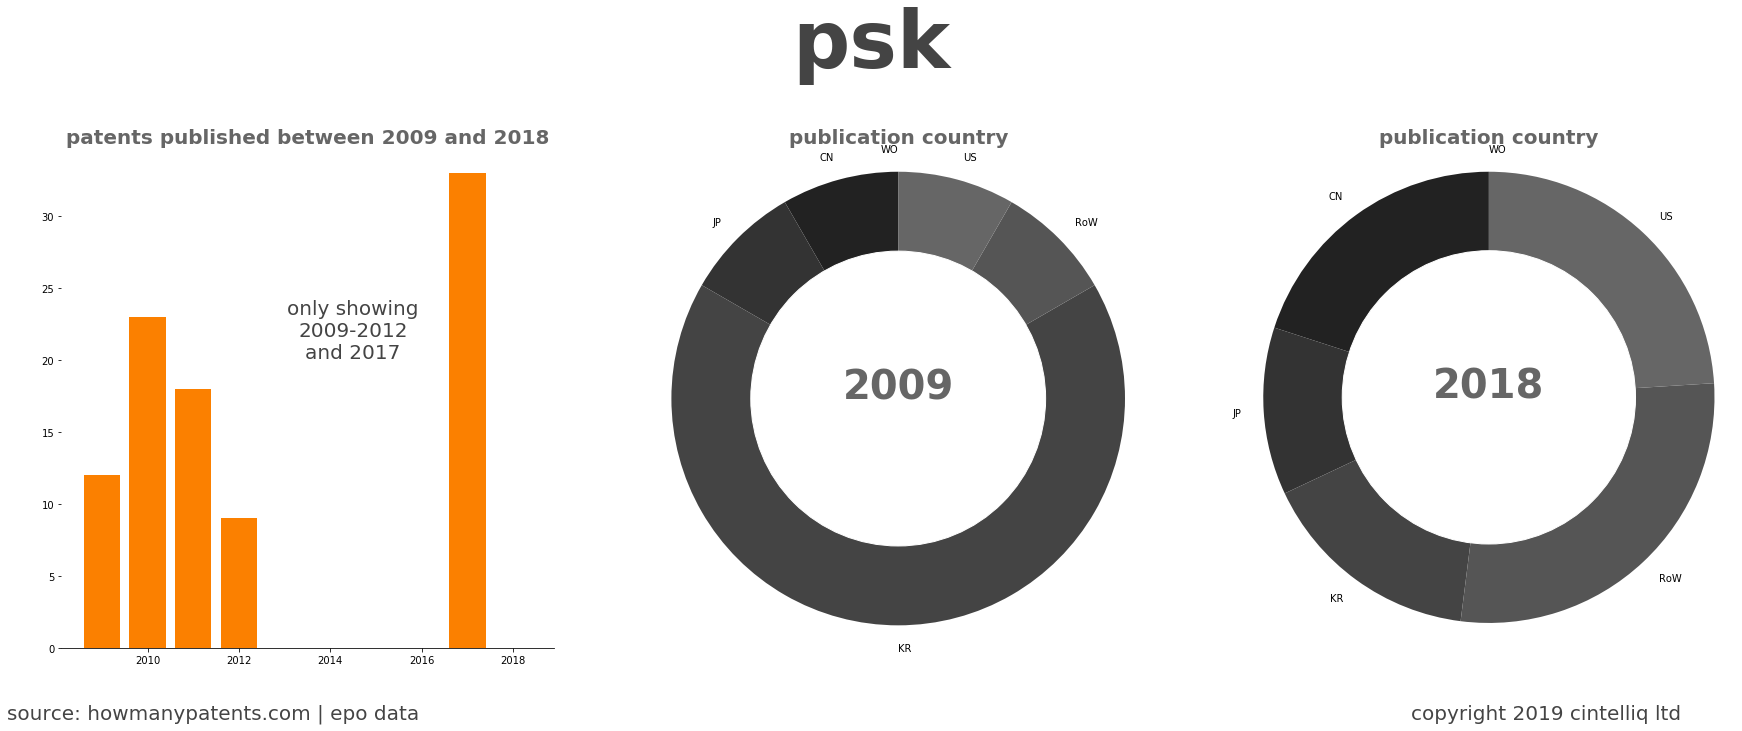 summary of patents for Psk